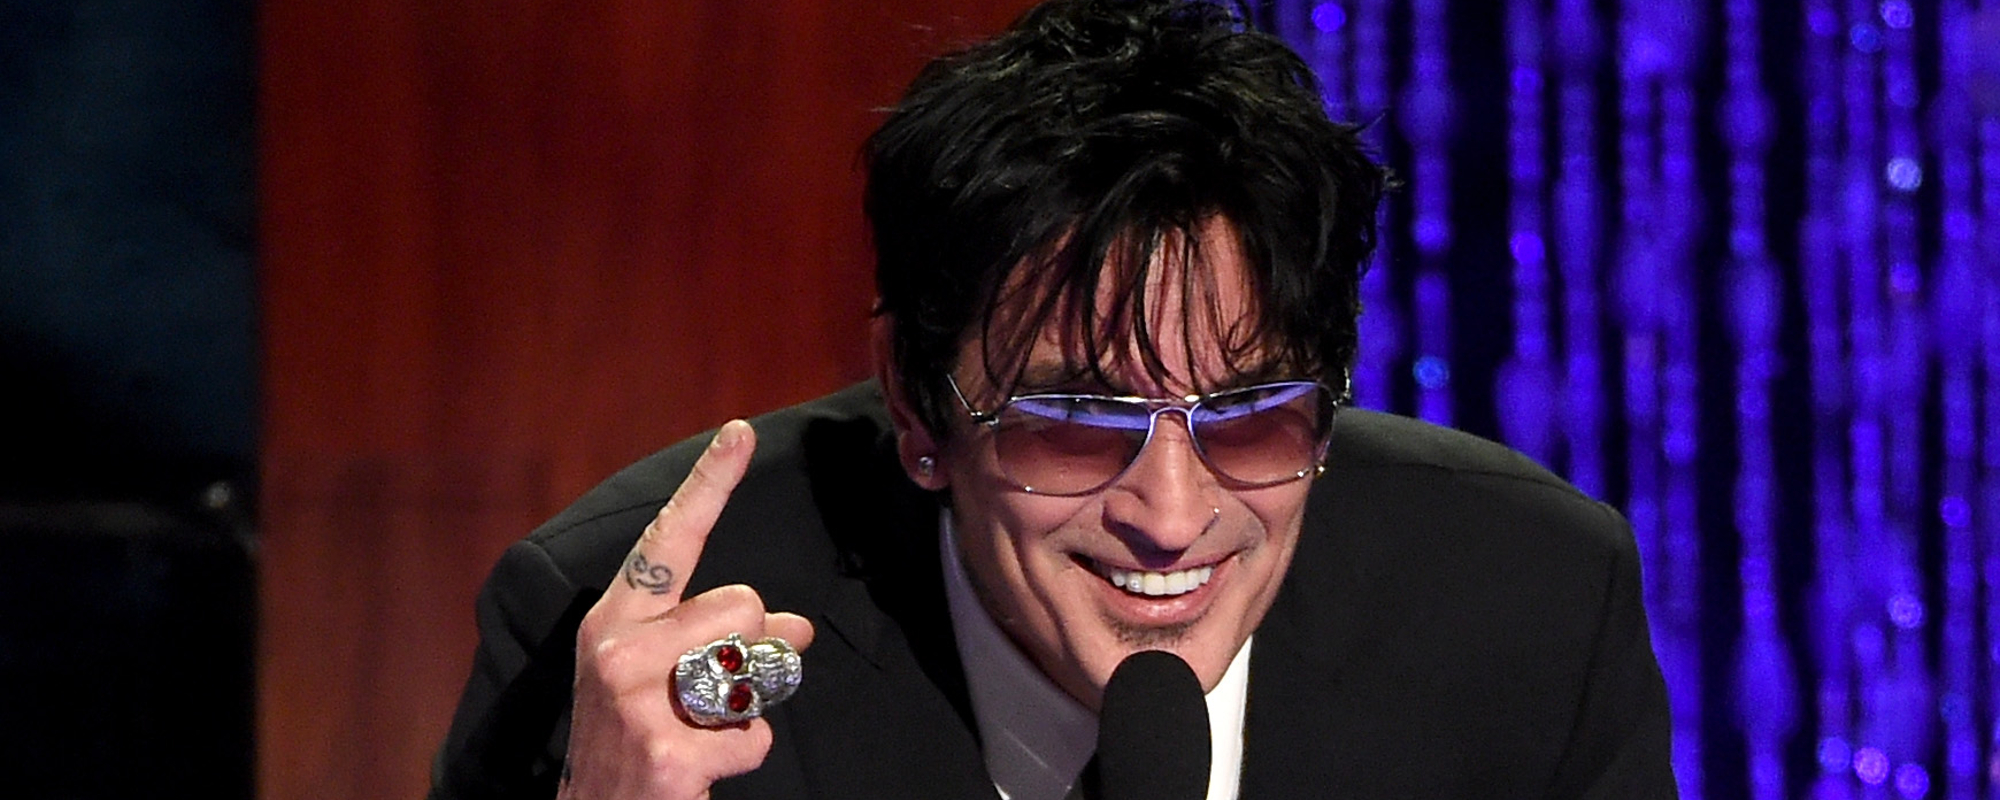 Tommy Lee Facing Lawsuit After Woman Accuses Him of Sexual Assault